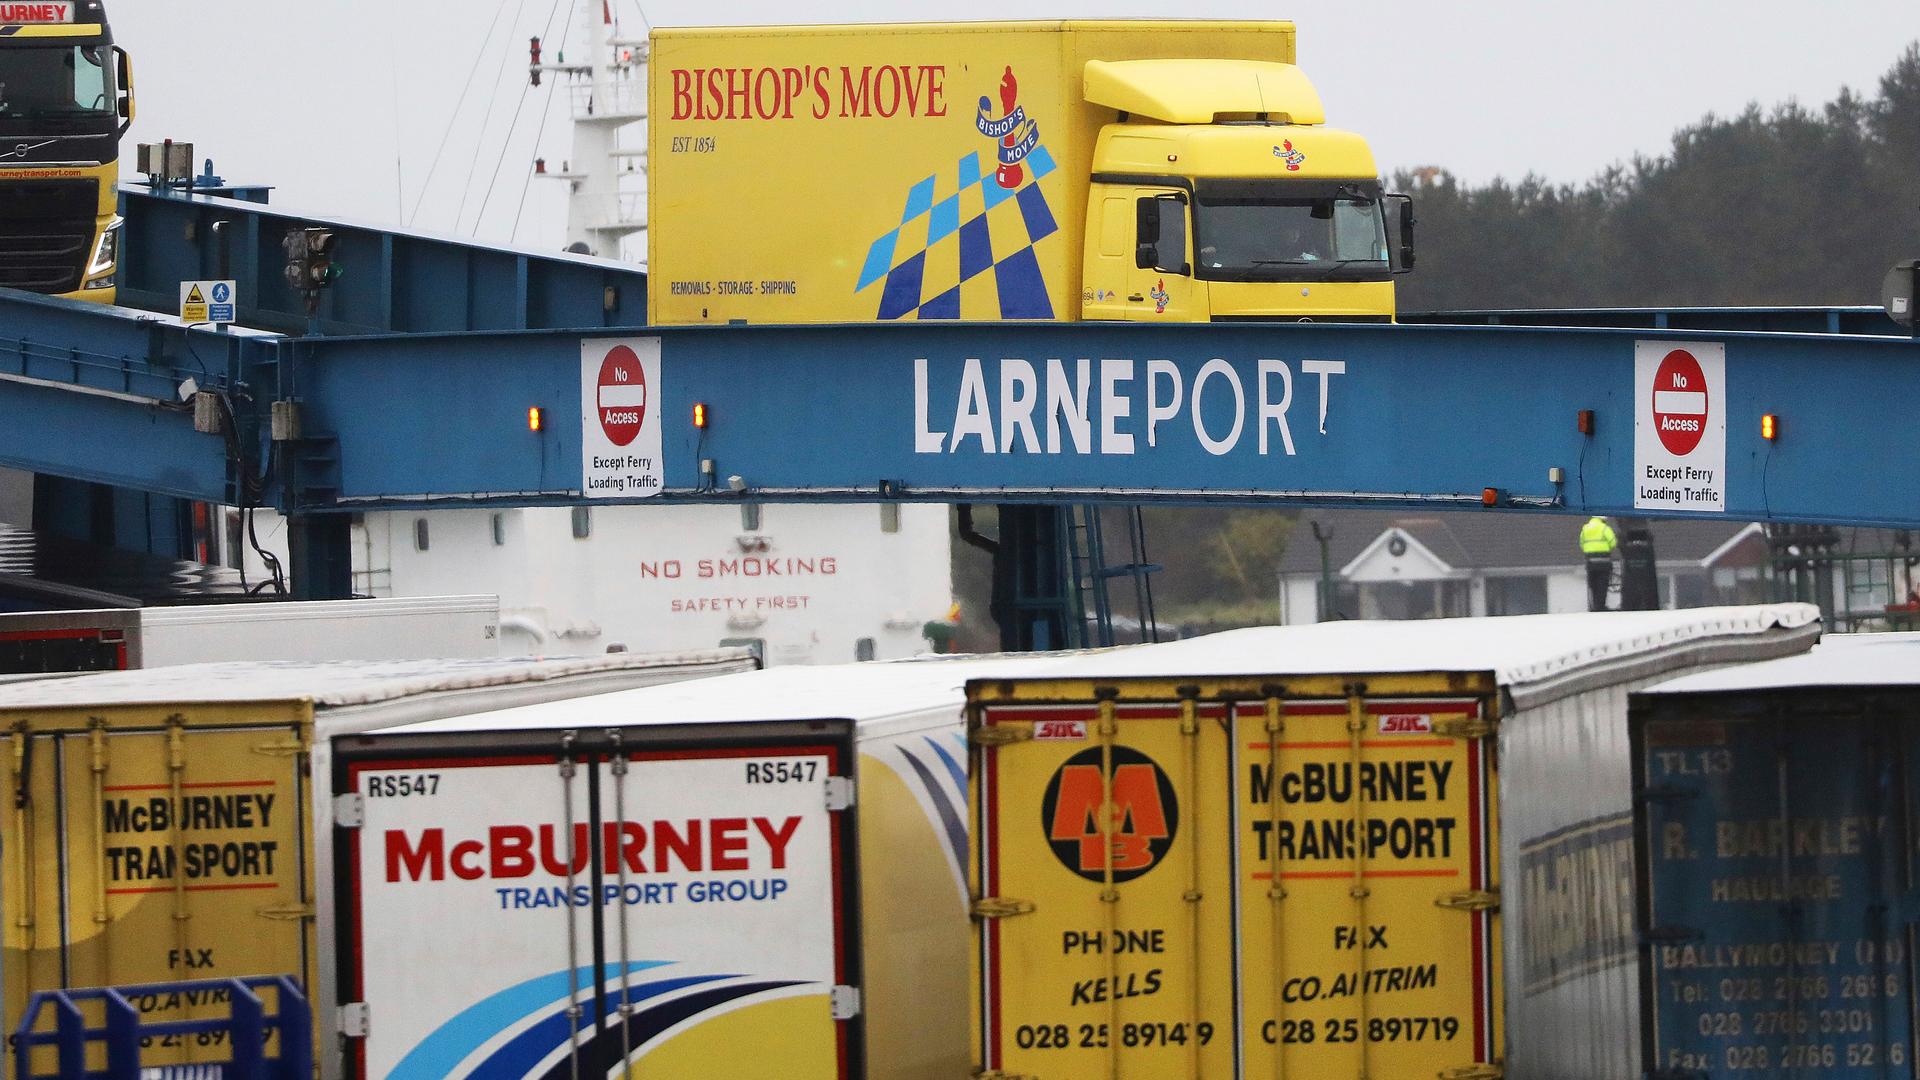 Blue, yellow, and white vehicles disembark from a ferry arriving from Scotland.  